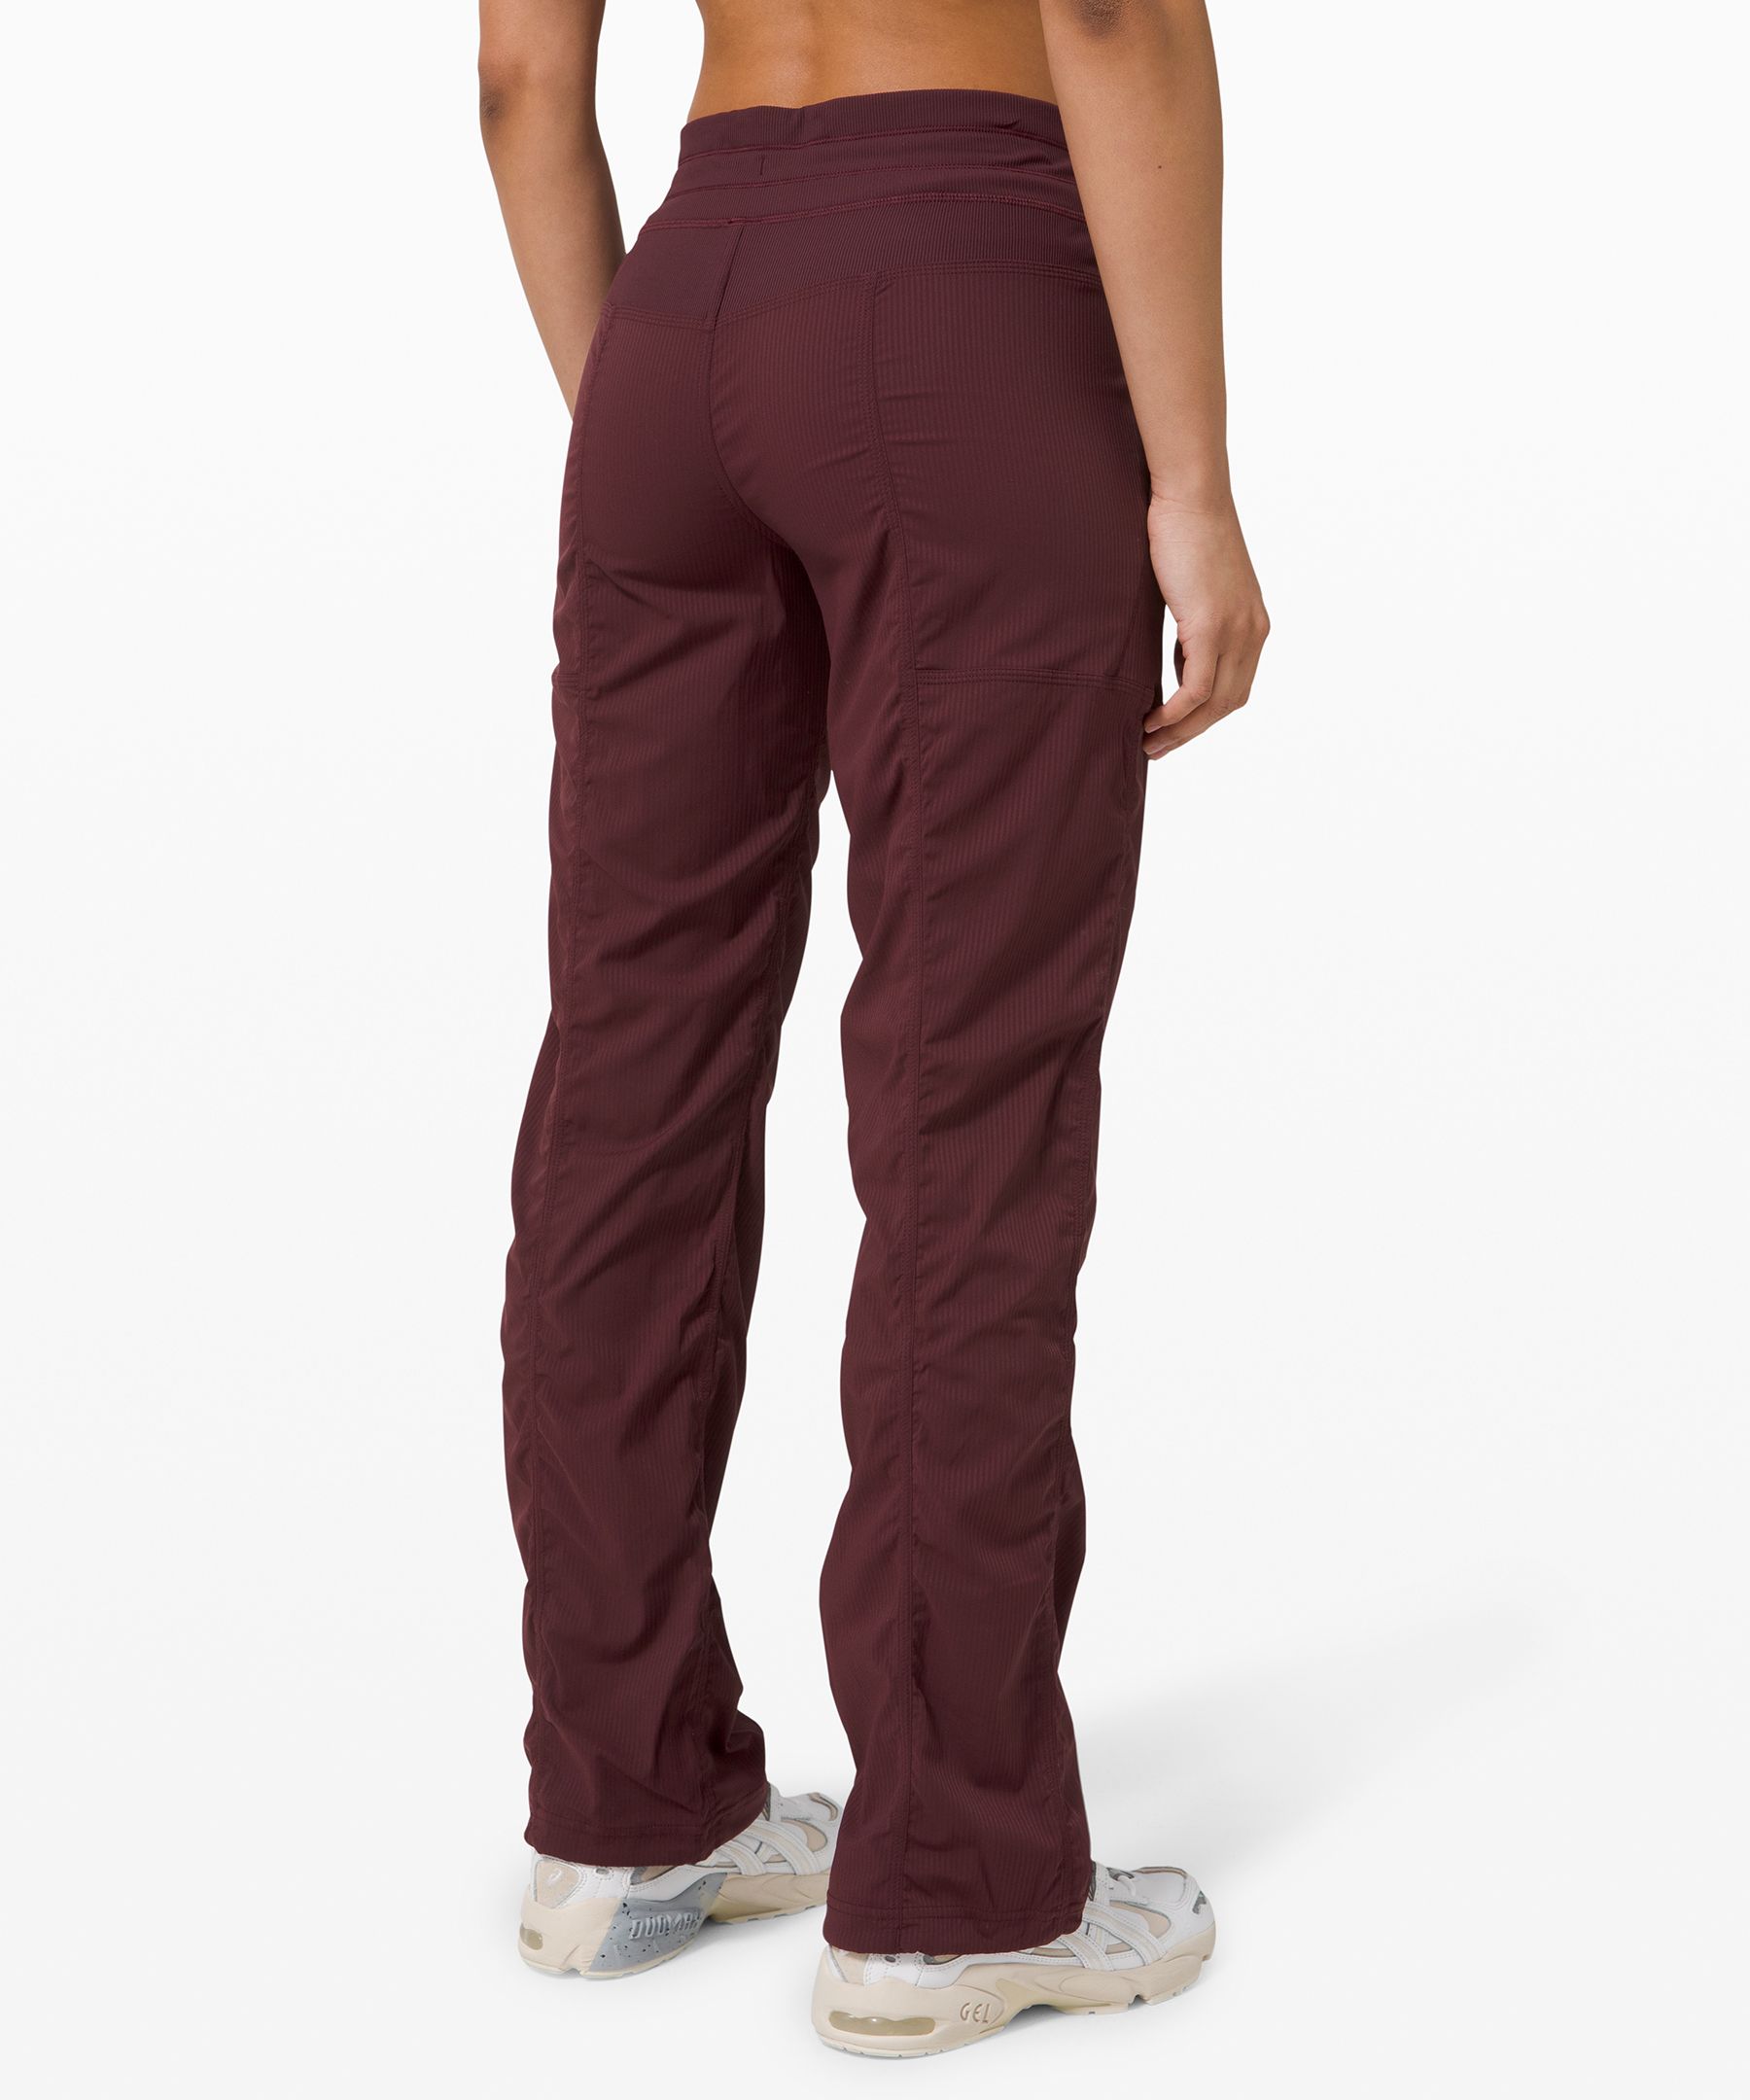 Lululemon Lined Dance Studio Pants  International Society of Precision  Agriculture